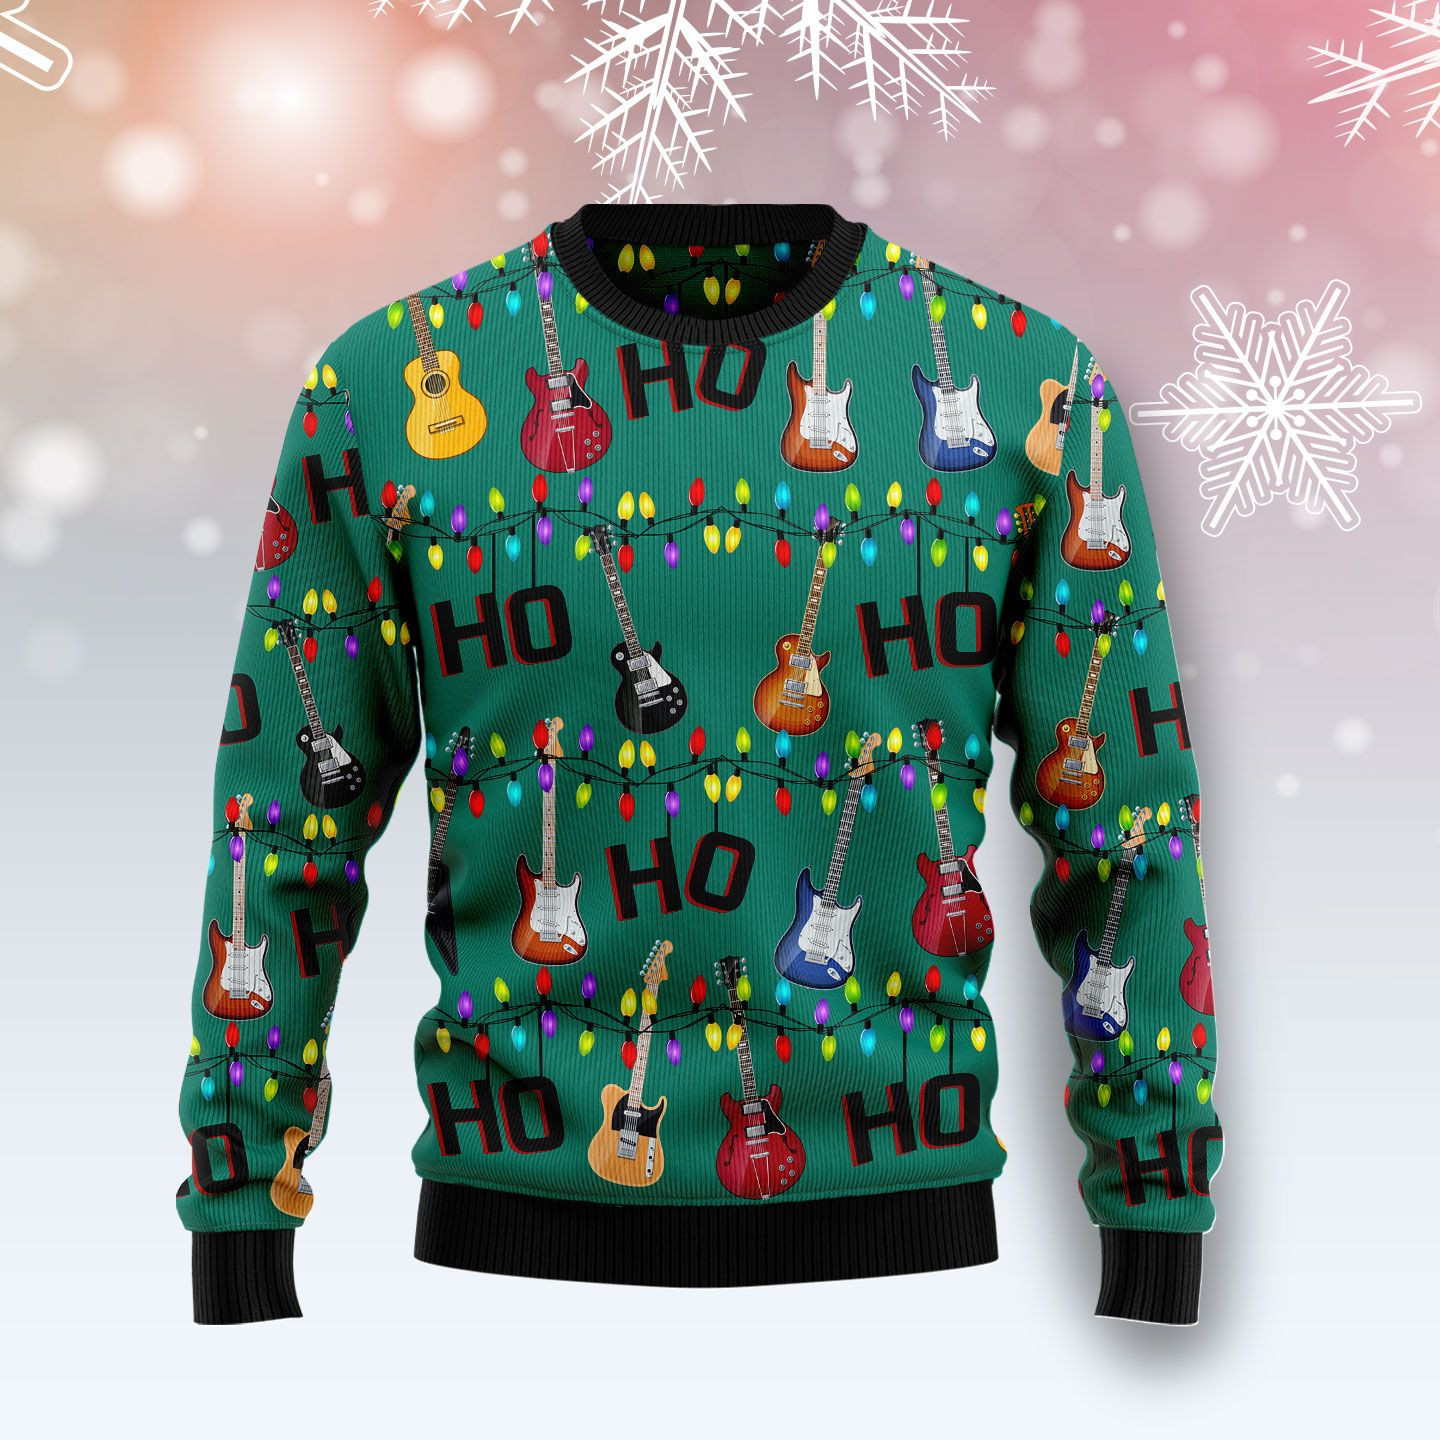 Electric Guitar Hohoho Ugly Christmas Sweater Ugly Sweater For Men Women, Holiday Sweater